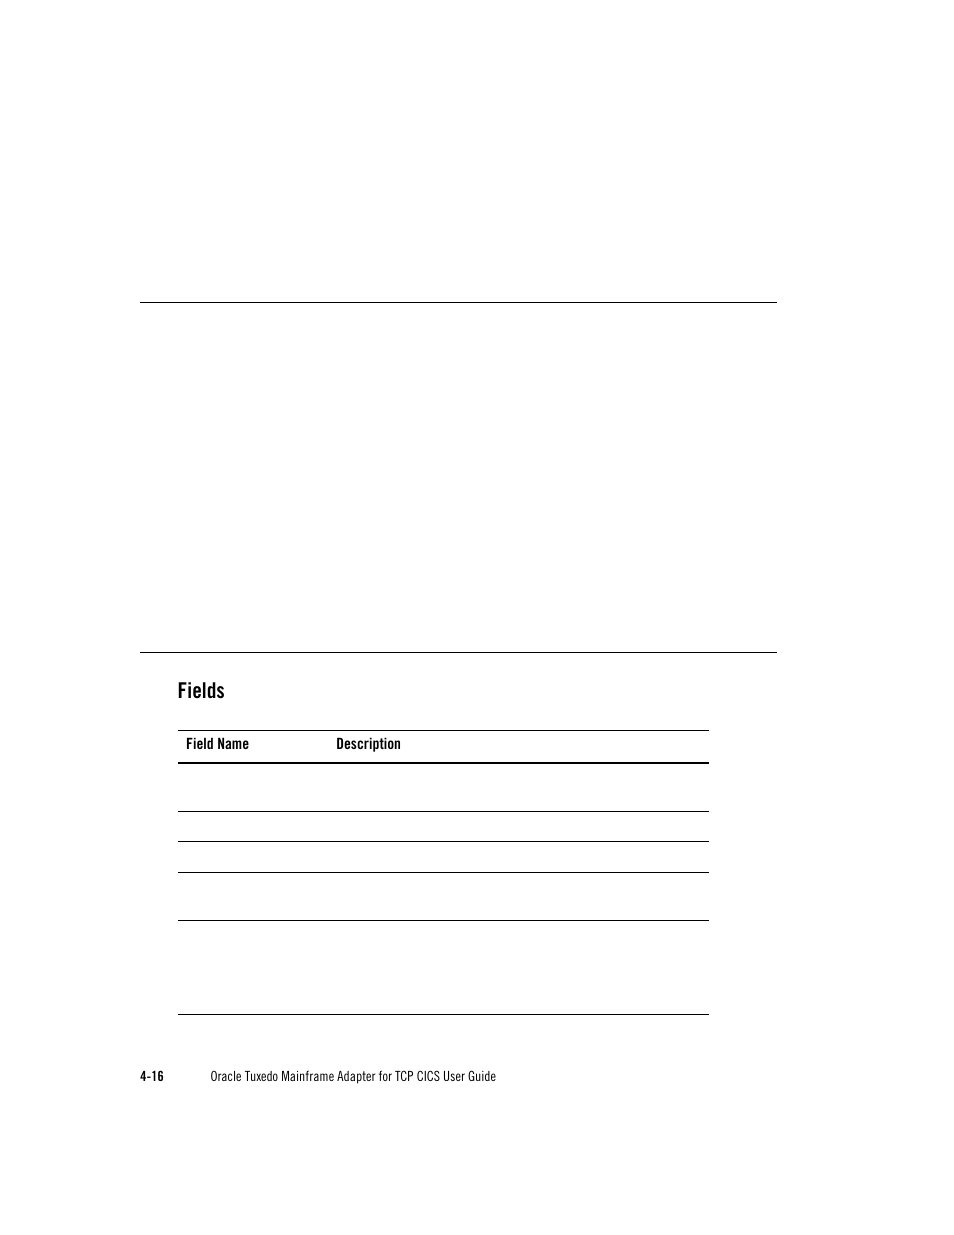 Fields | Oracle Audio Technologies Oracle Tuxedo User Manual | Page 50 / 112